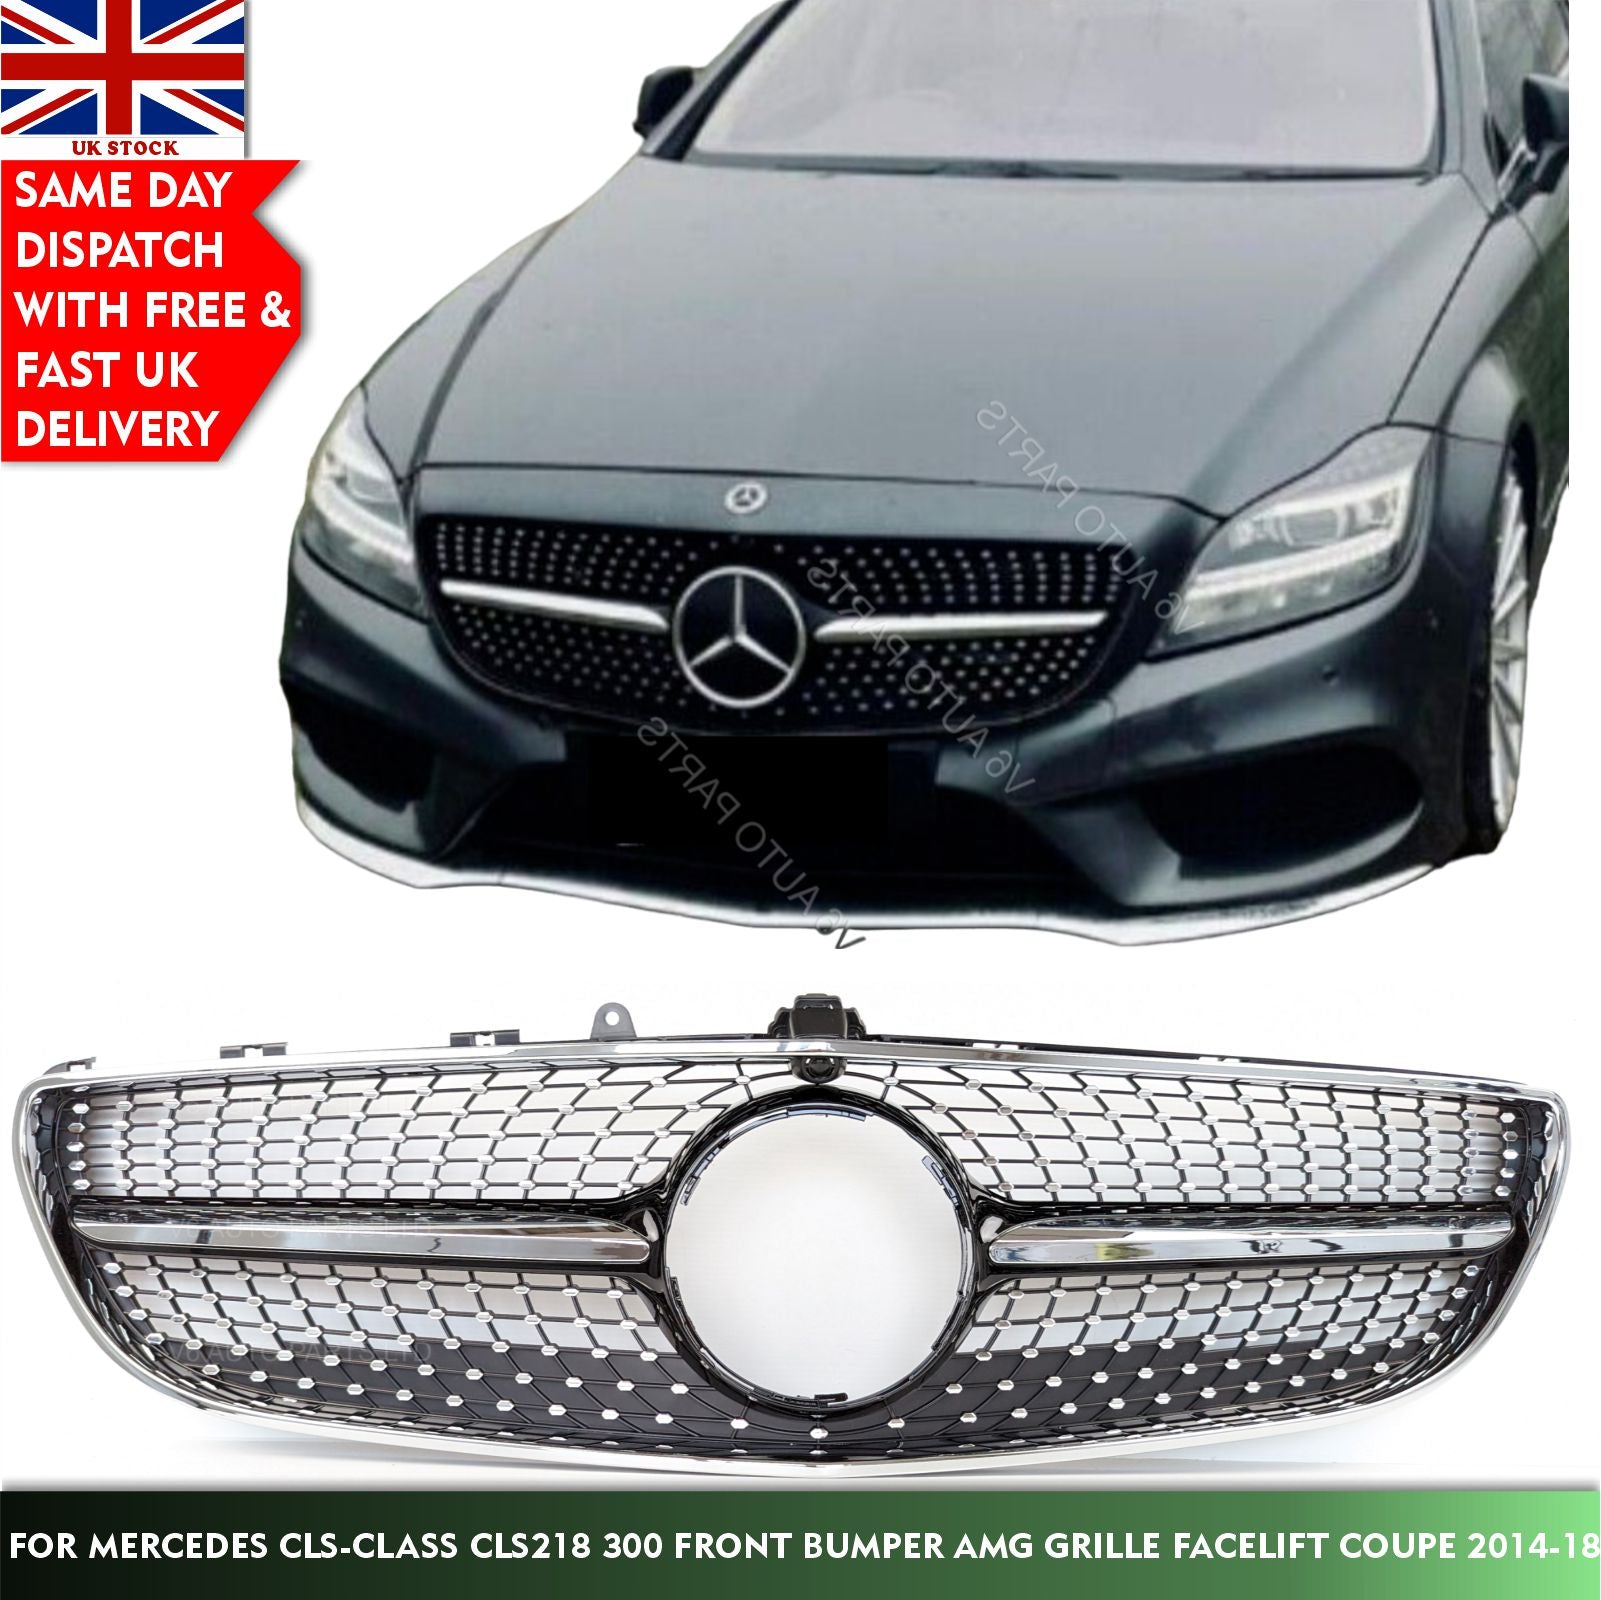 For Mercedes CLS-Class CLS218 300 Front Bumper AMG Grille Facelift Coupe 2014-18